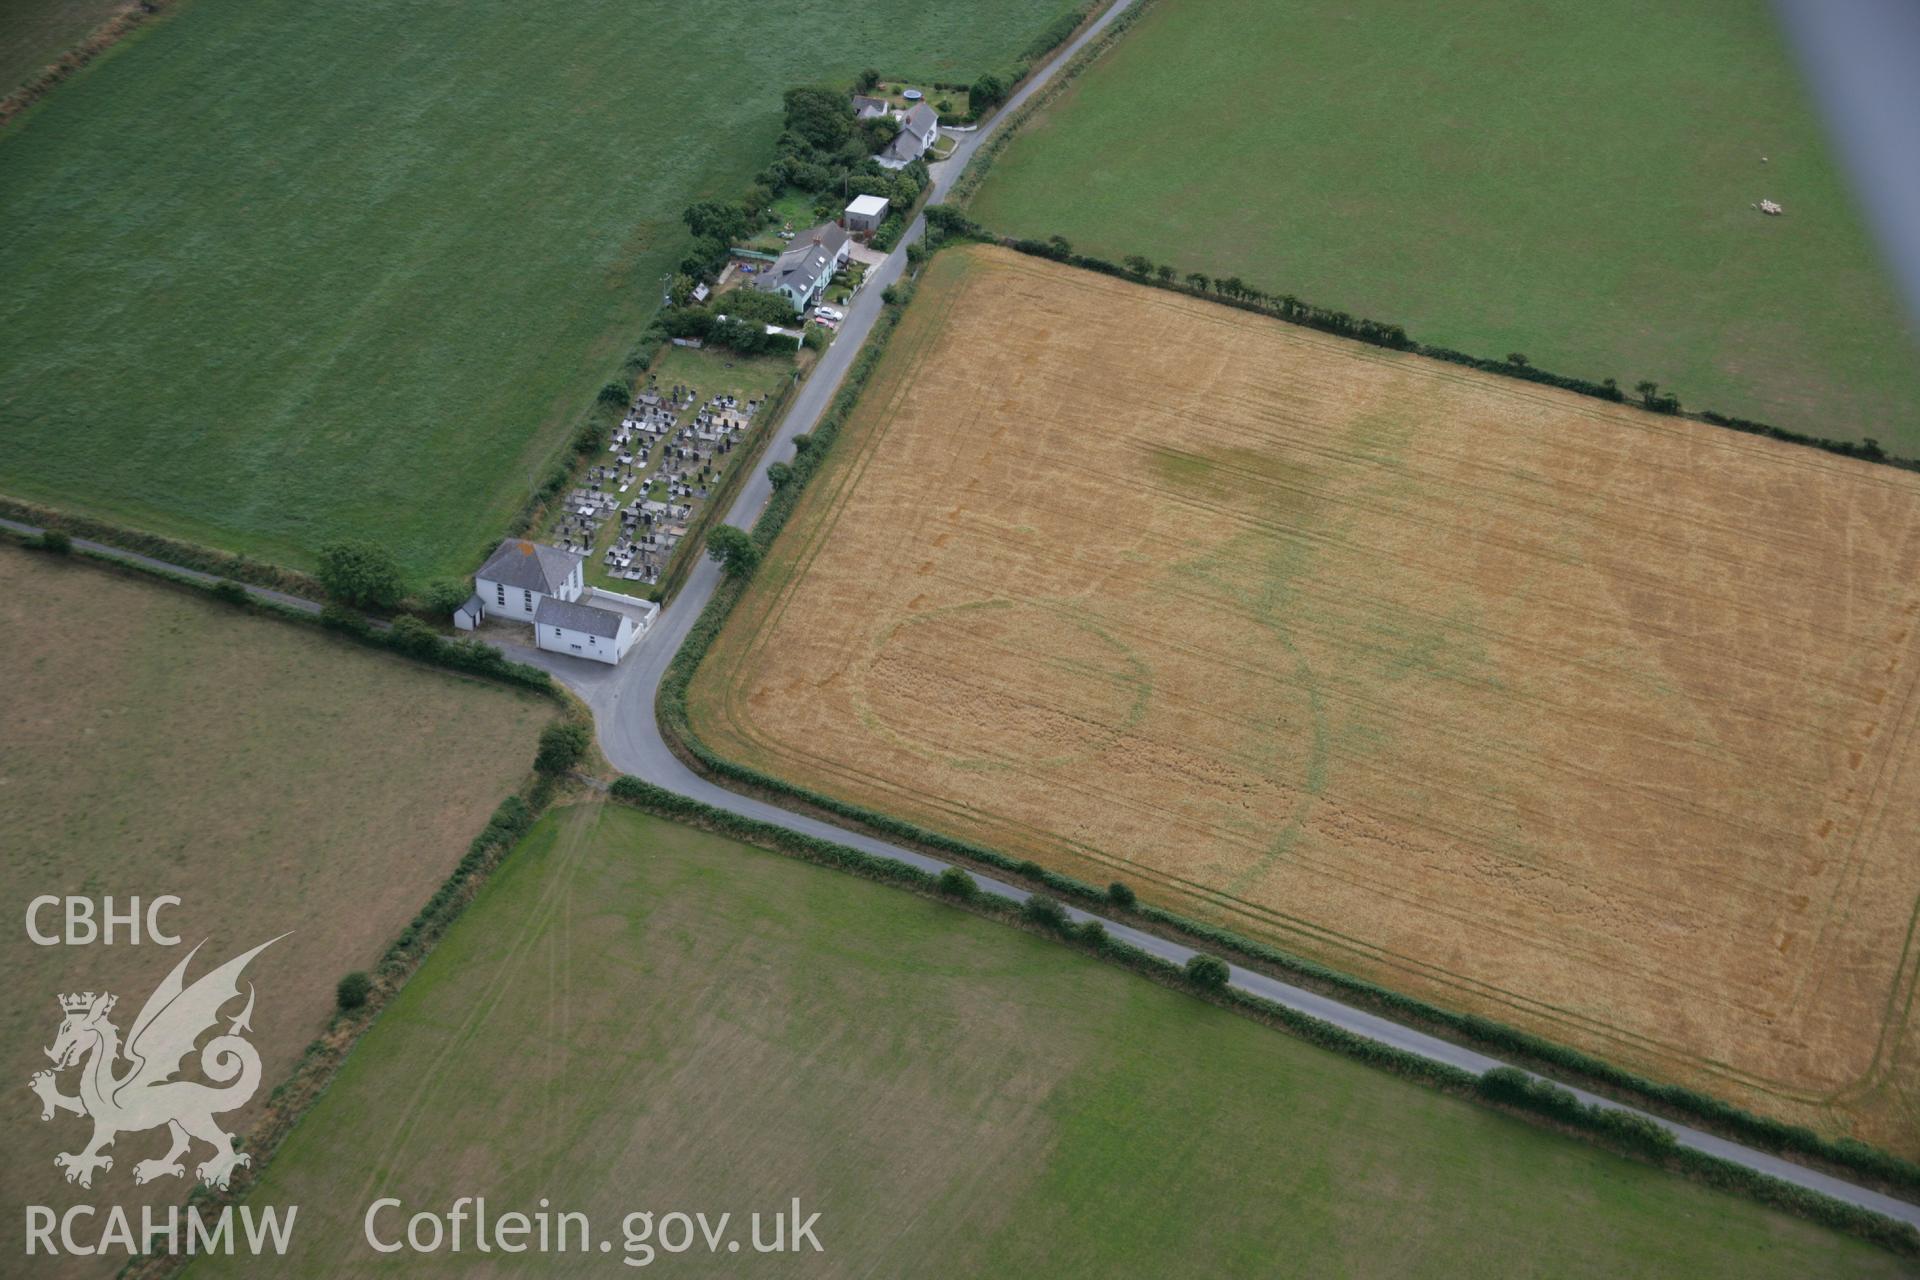 RCAHMW colour oblique aerial photograph of a cropmark enclosure east of Treferedd Uchaf. Taken on 27 July 2006 by Toby Driver.